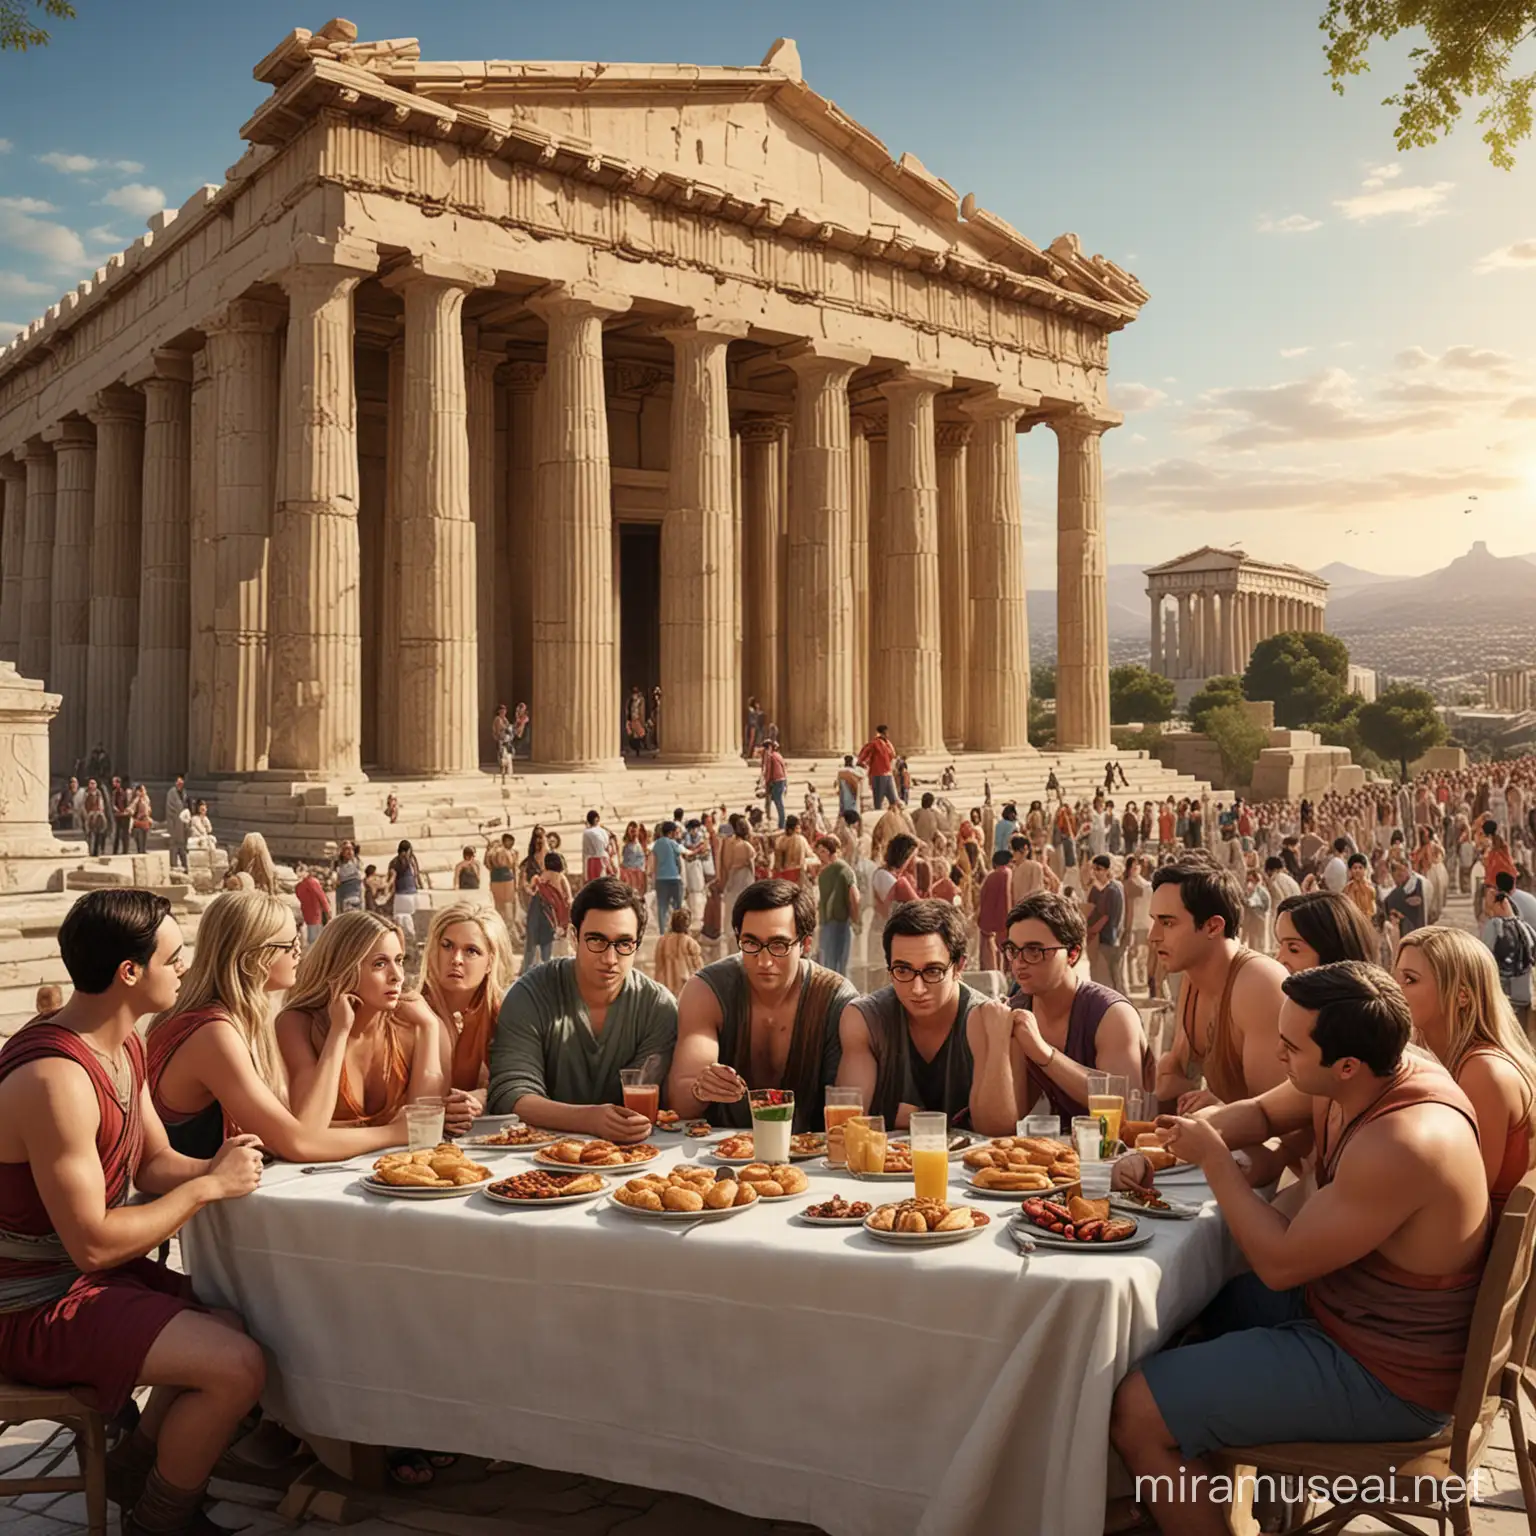 The characters from the big bang theory well represented at the Holy Supper in an ultra-realistic setting with the Parthenon temple in a realistic setting in ancient Greece as the background, eating and drinking (sfihas, juices, donuts and pizzas)